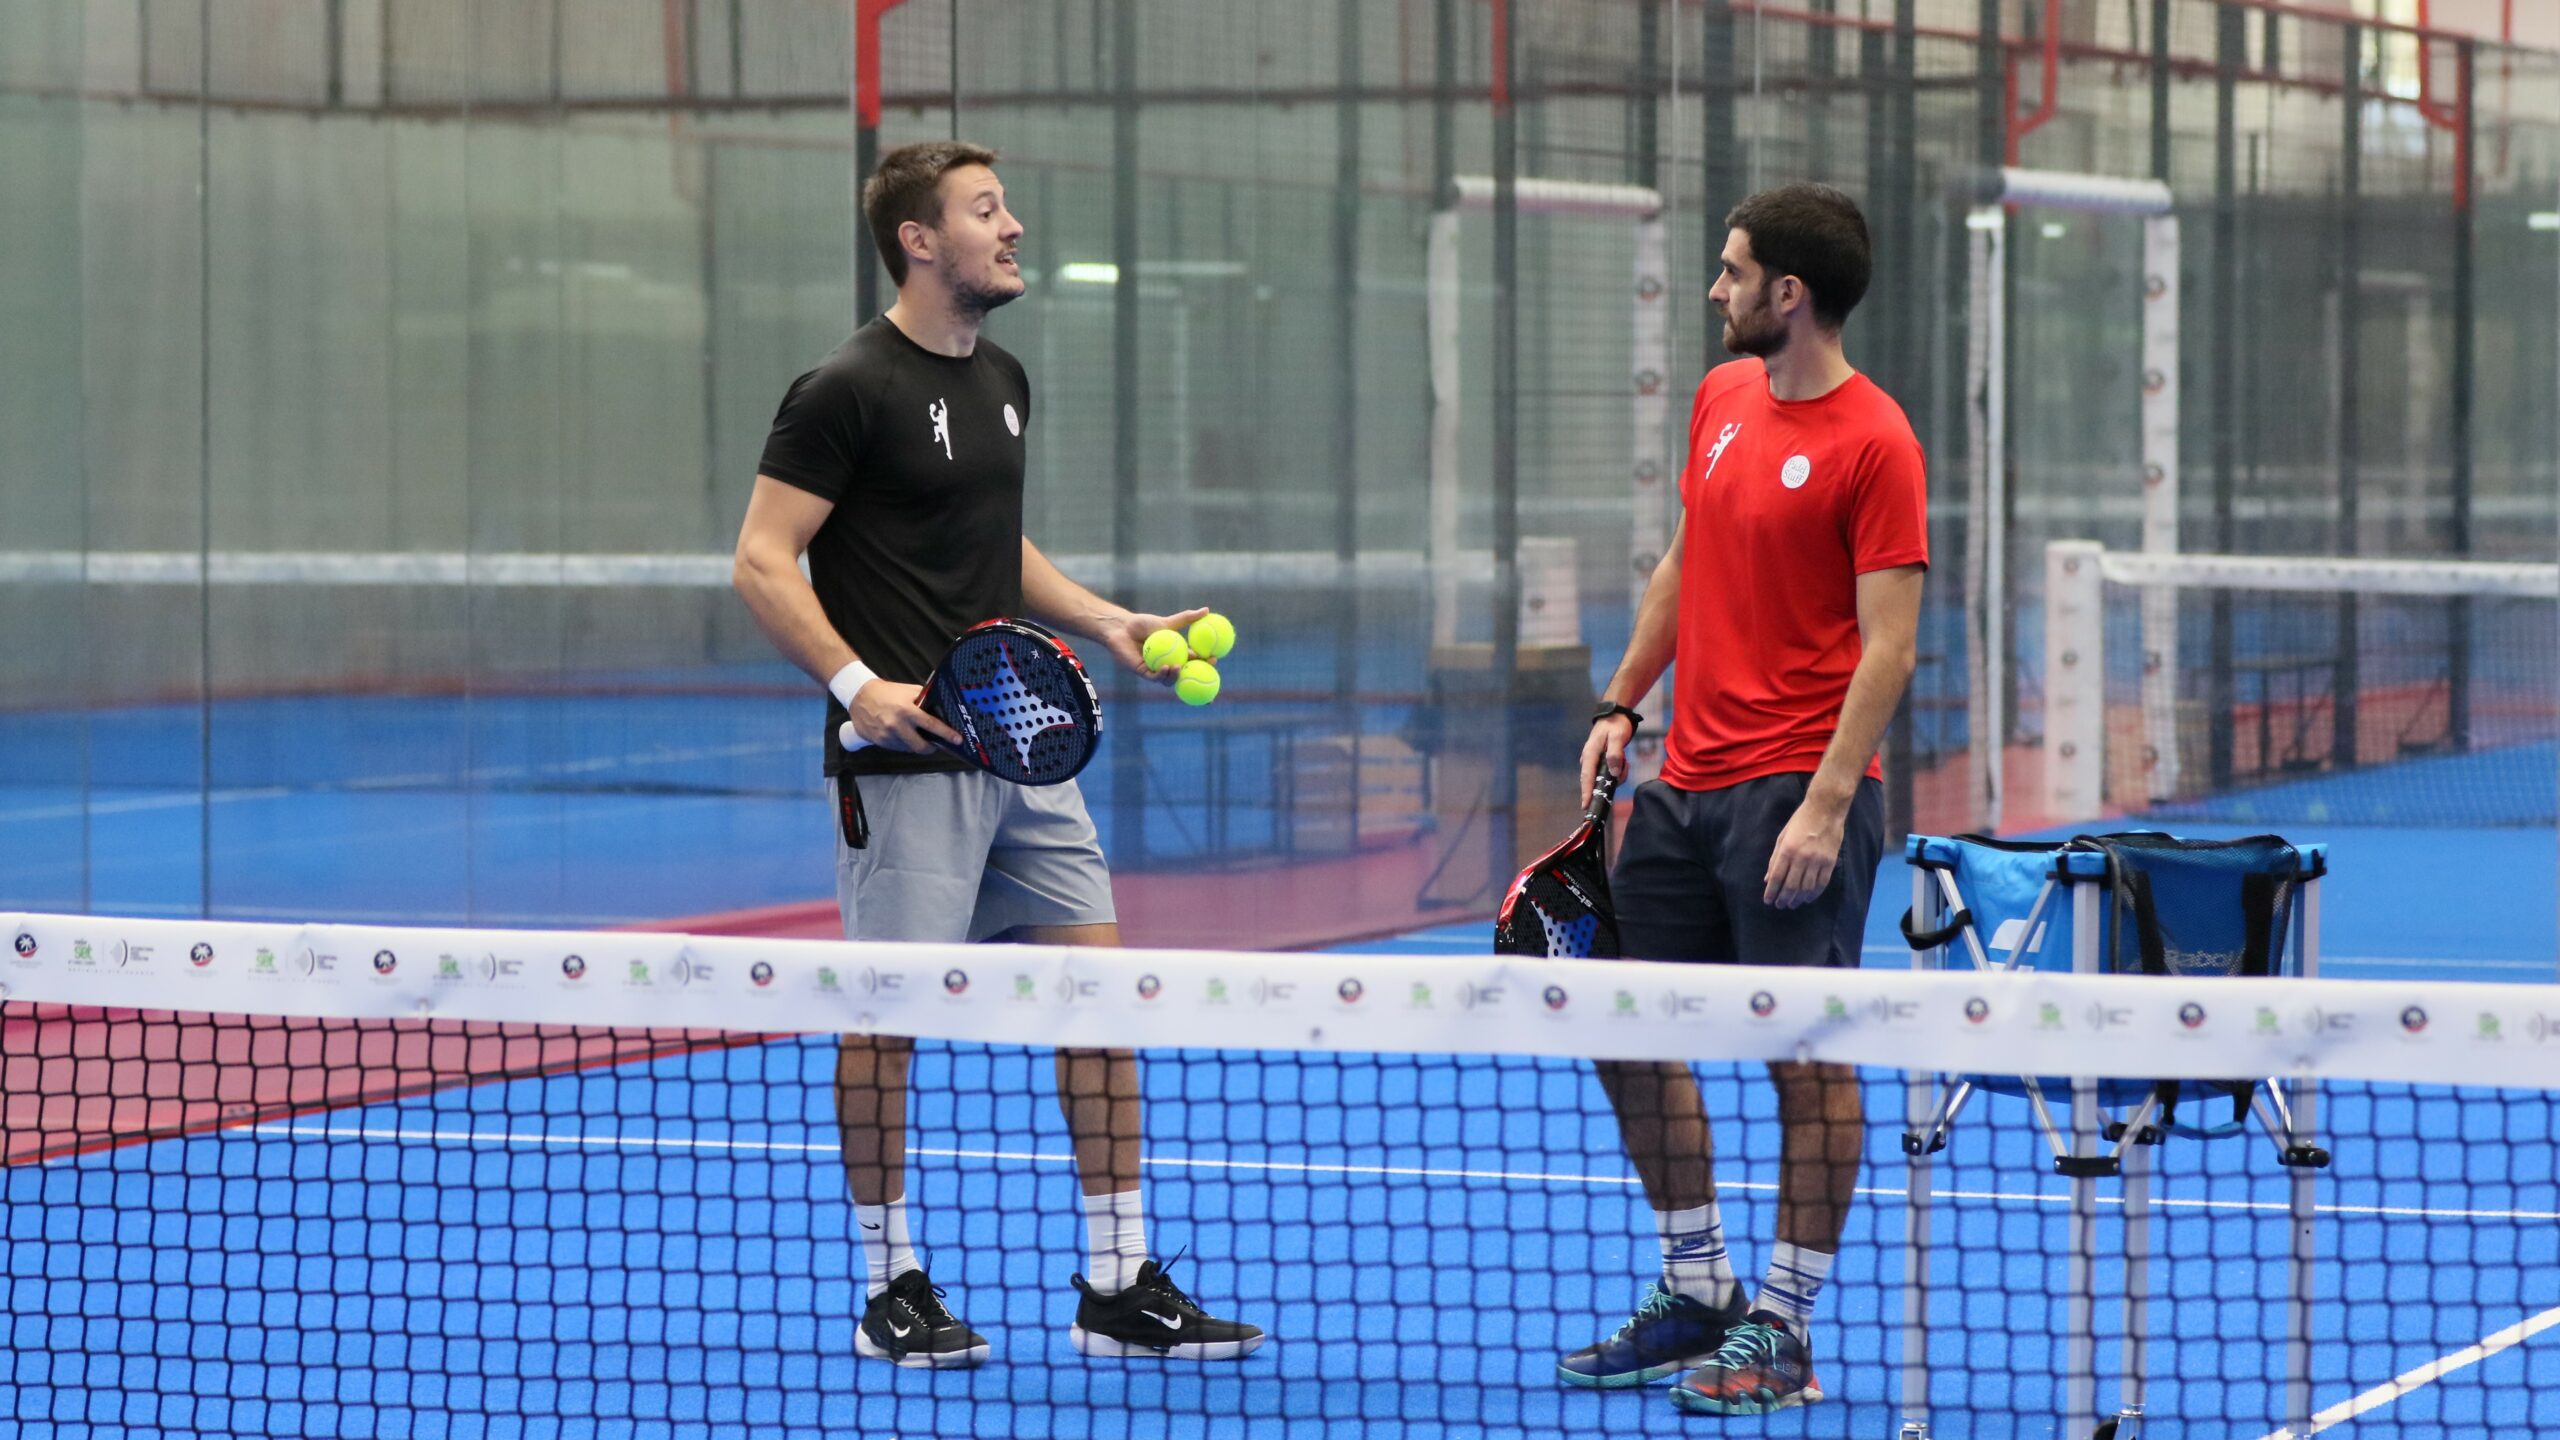 At the heart of padel – Episode 6: Impossible Defenses